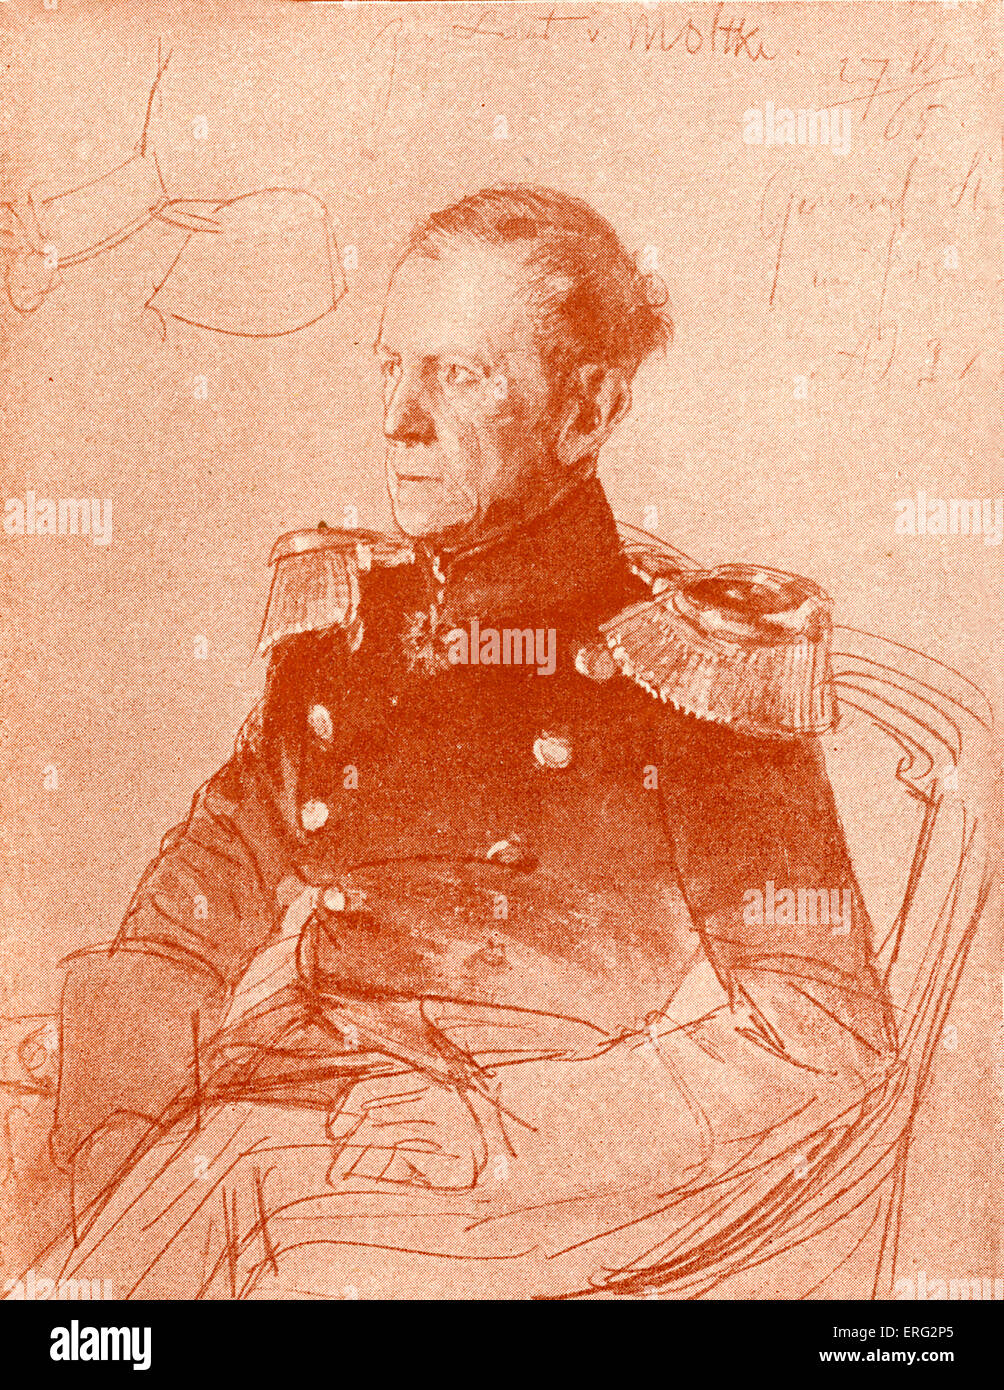 General Chief of Staff Count Helmut von Moltke, Chief of Staff to the Prussian army 26 October 1800 -24 April 1891. Stock Photo